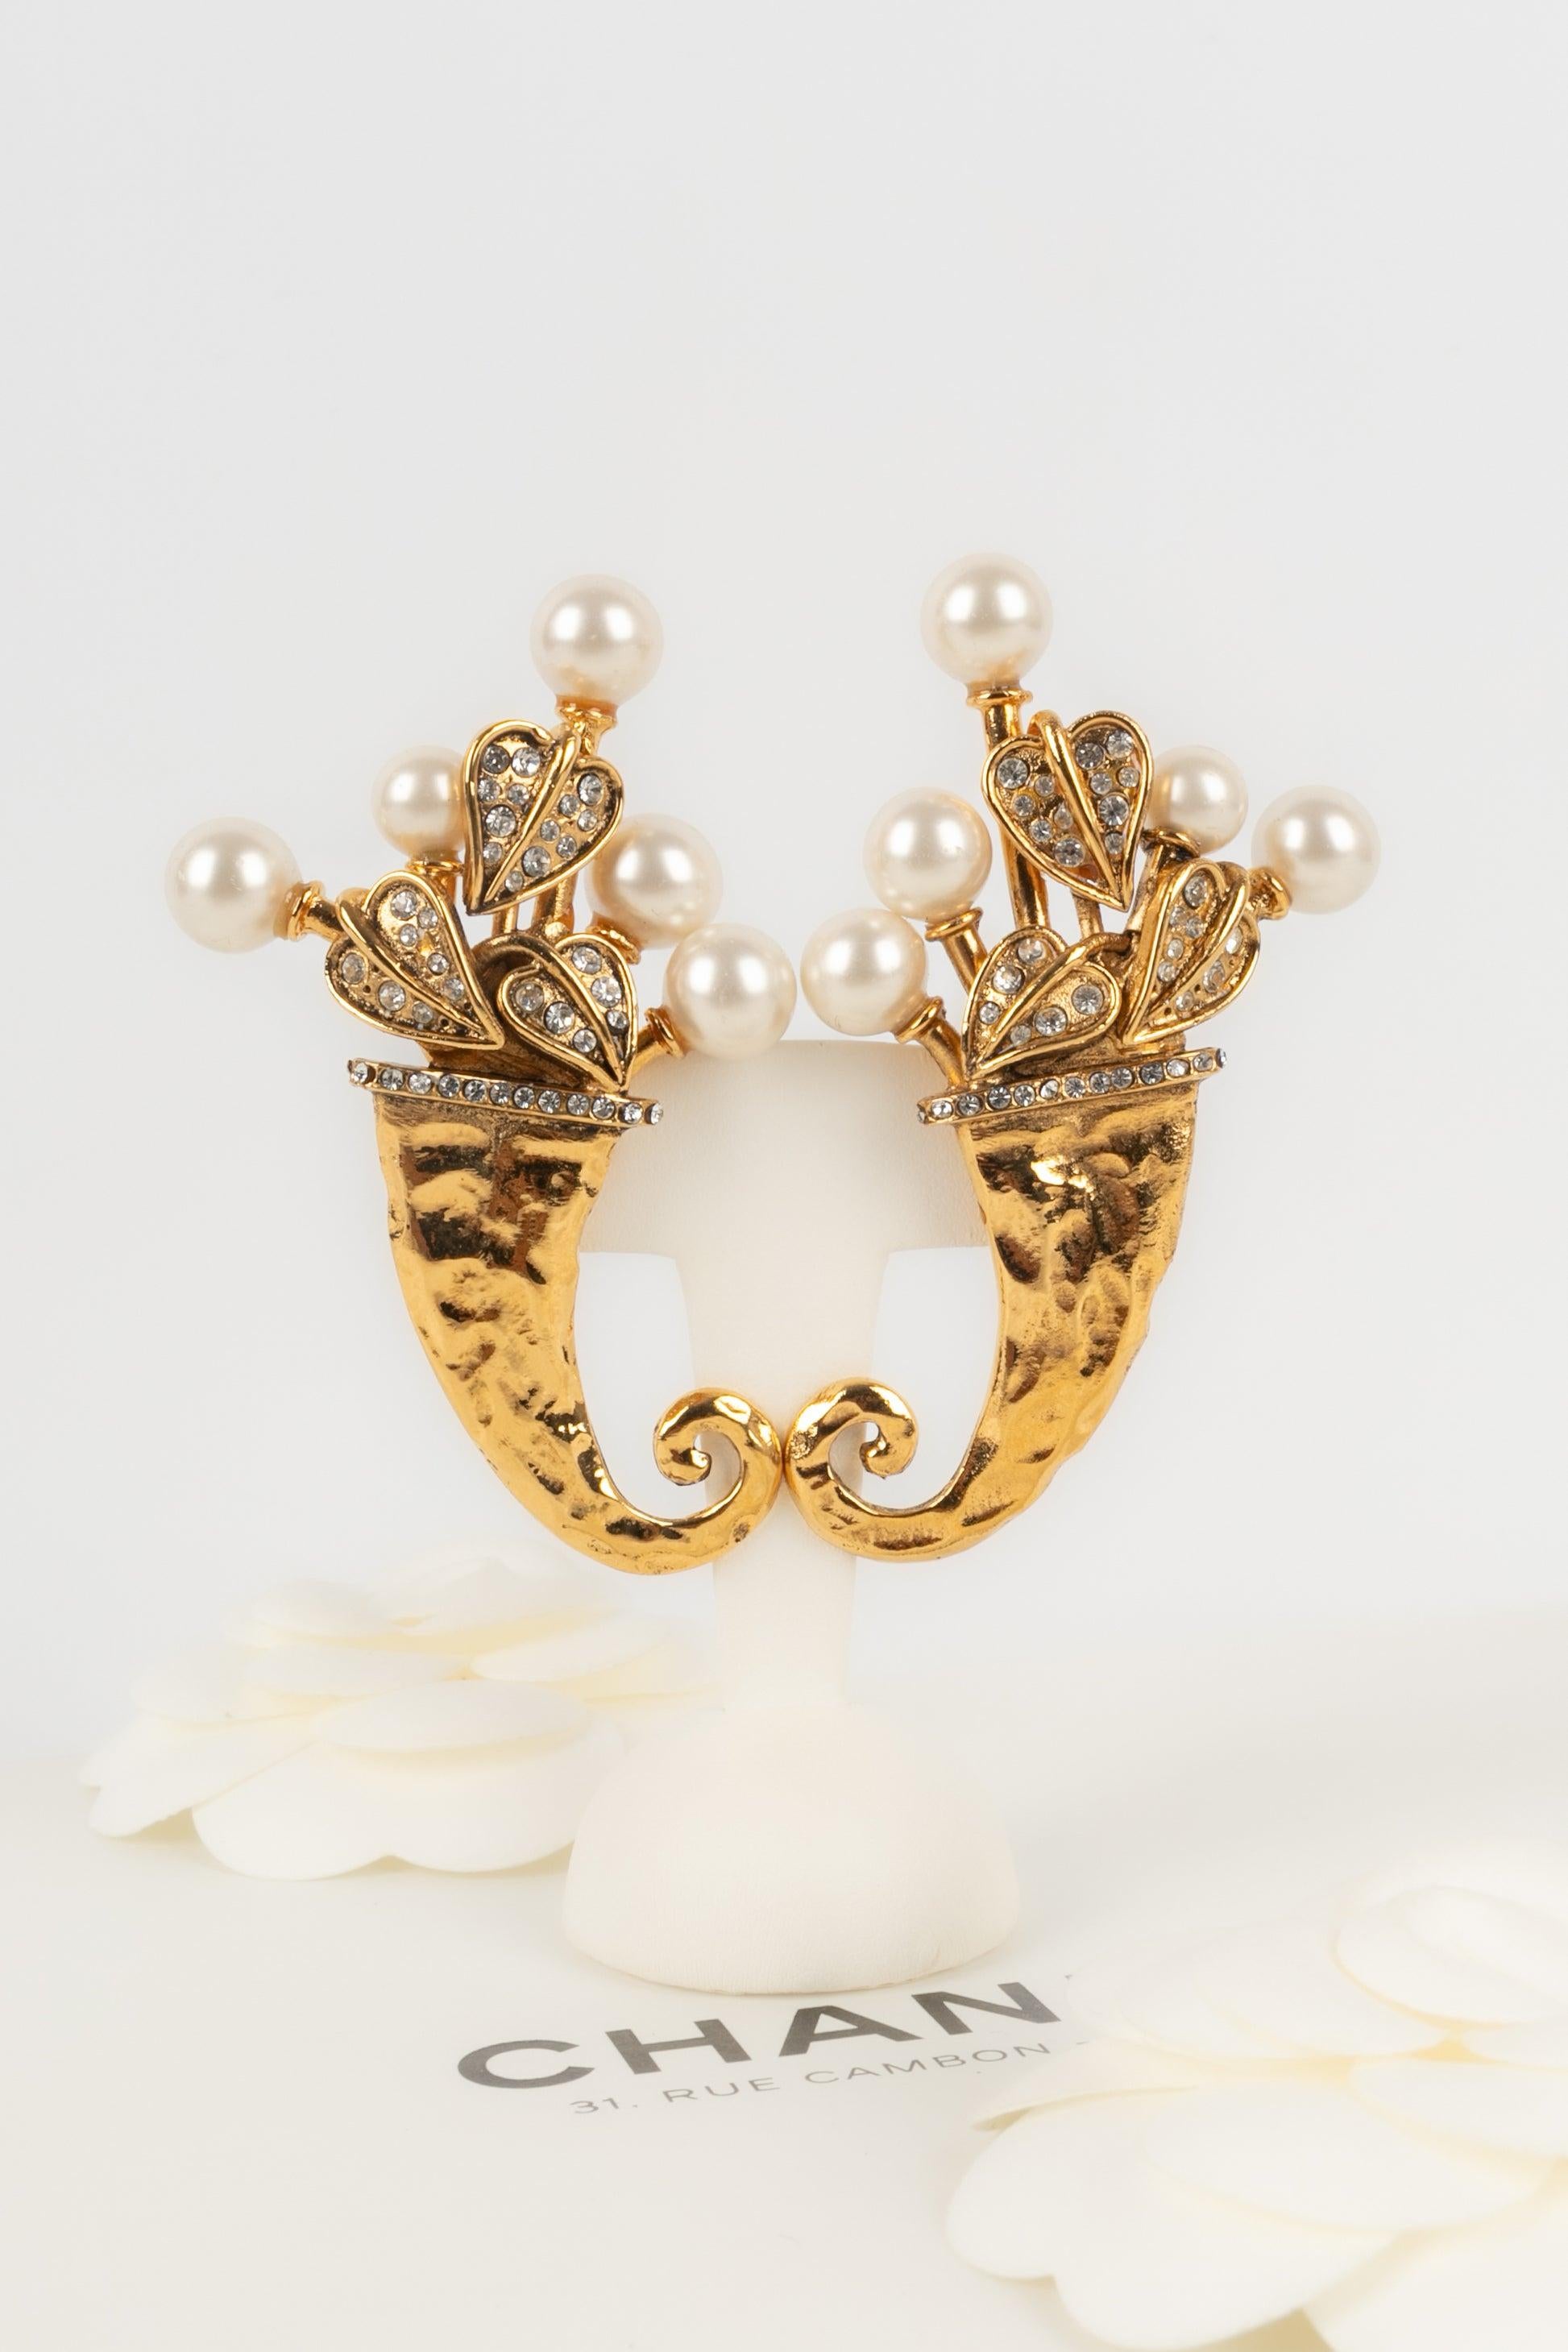 Chanel Golden Metal Earrings with Costume Pearls and Rhinestones For Sale 4